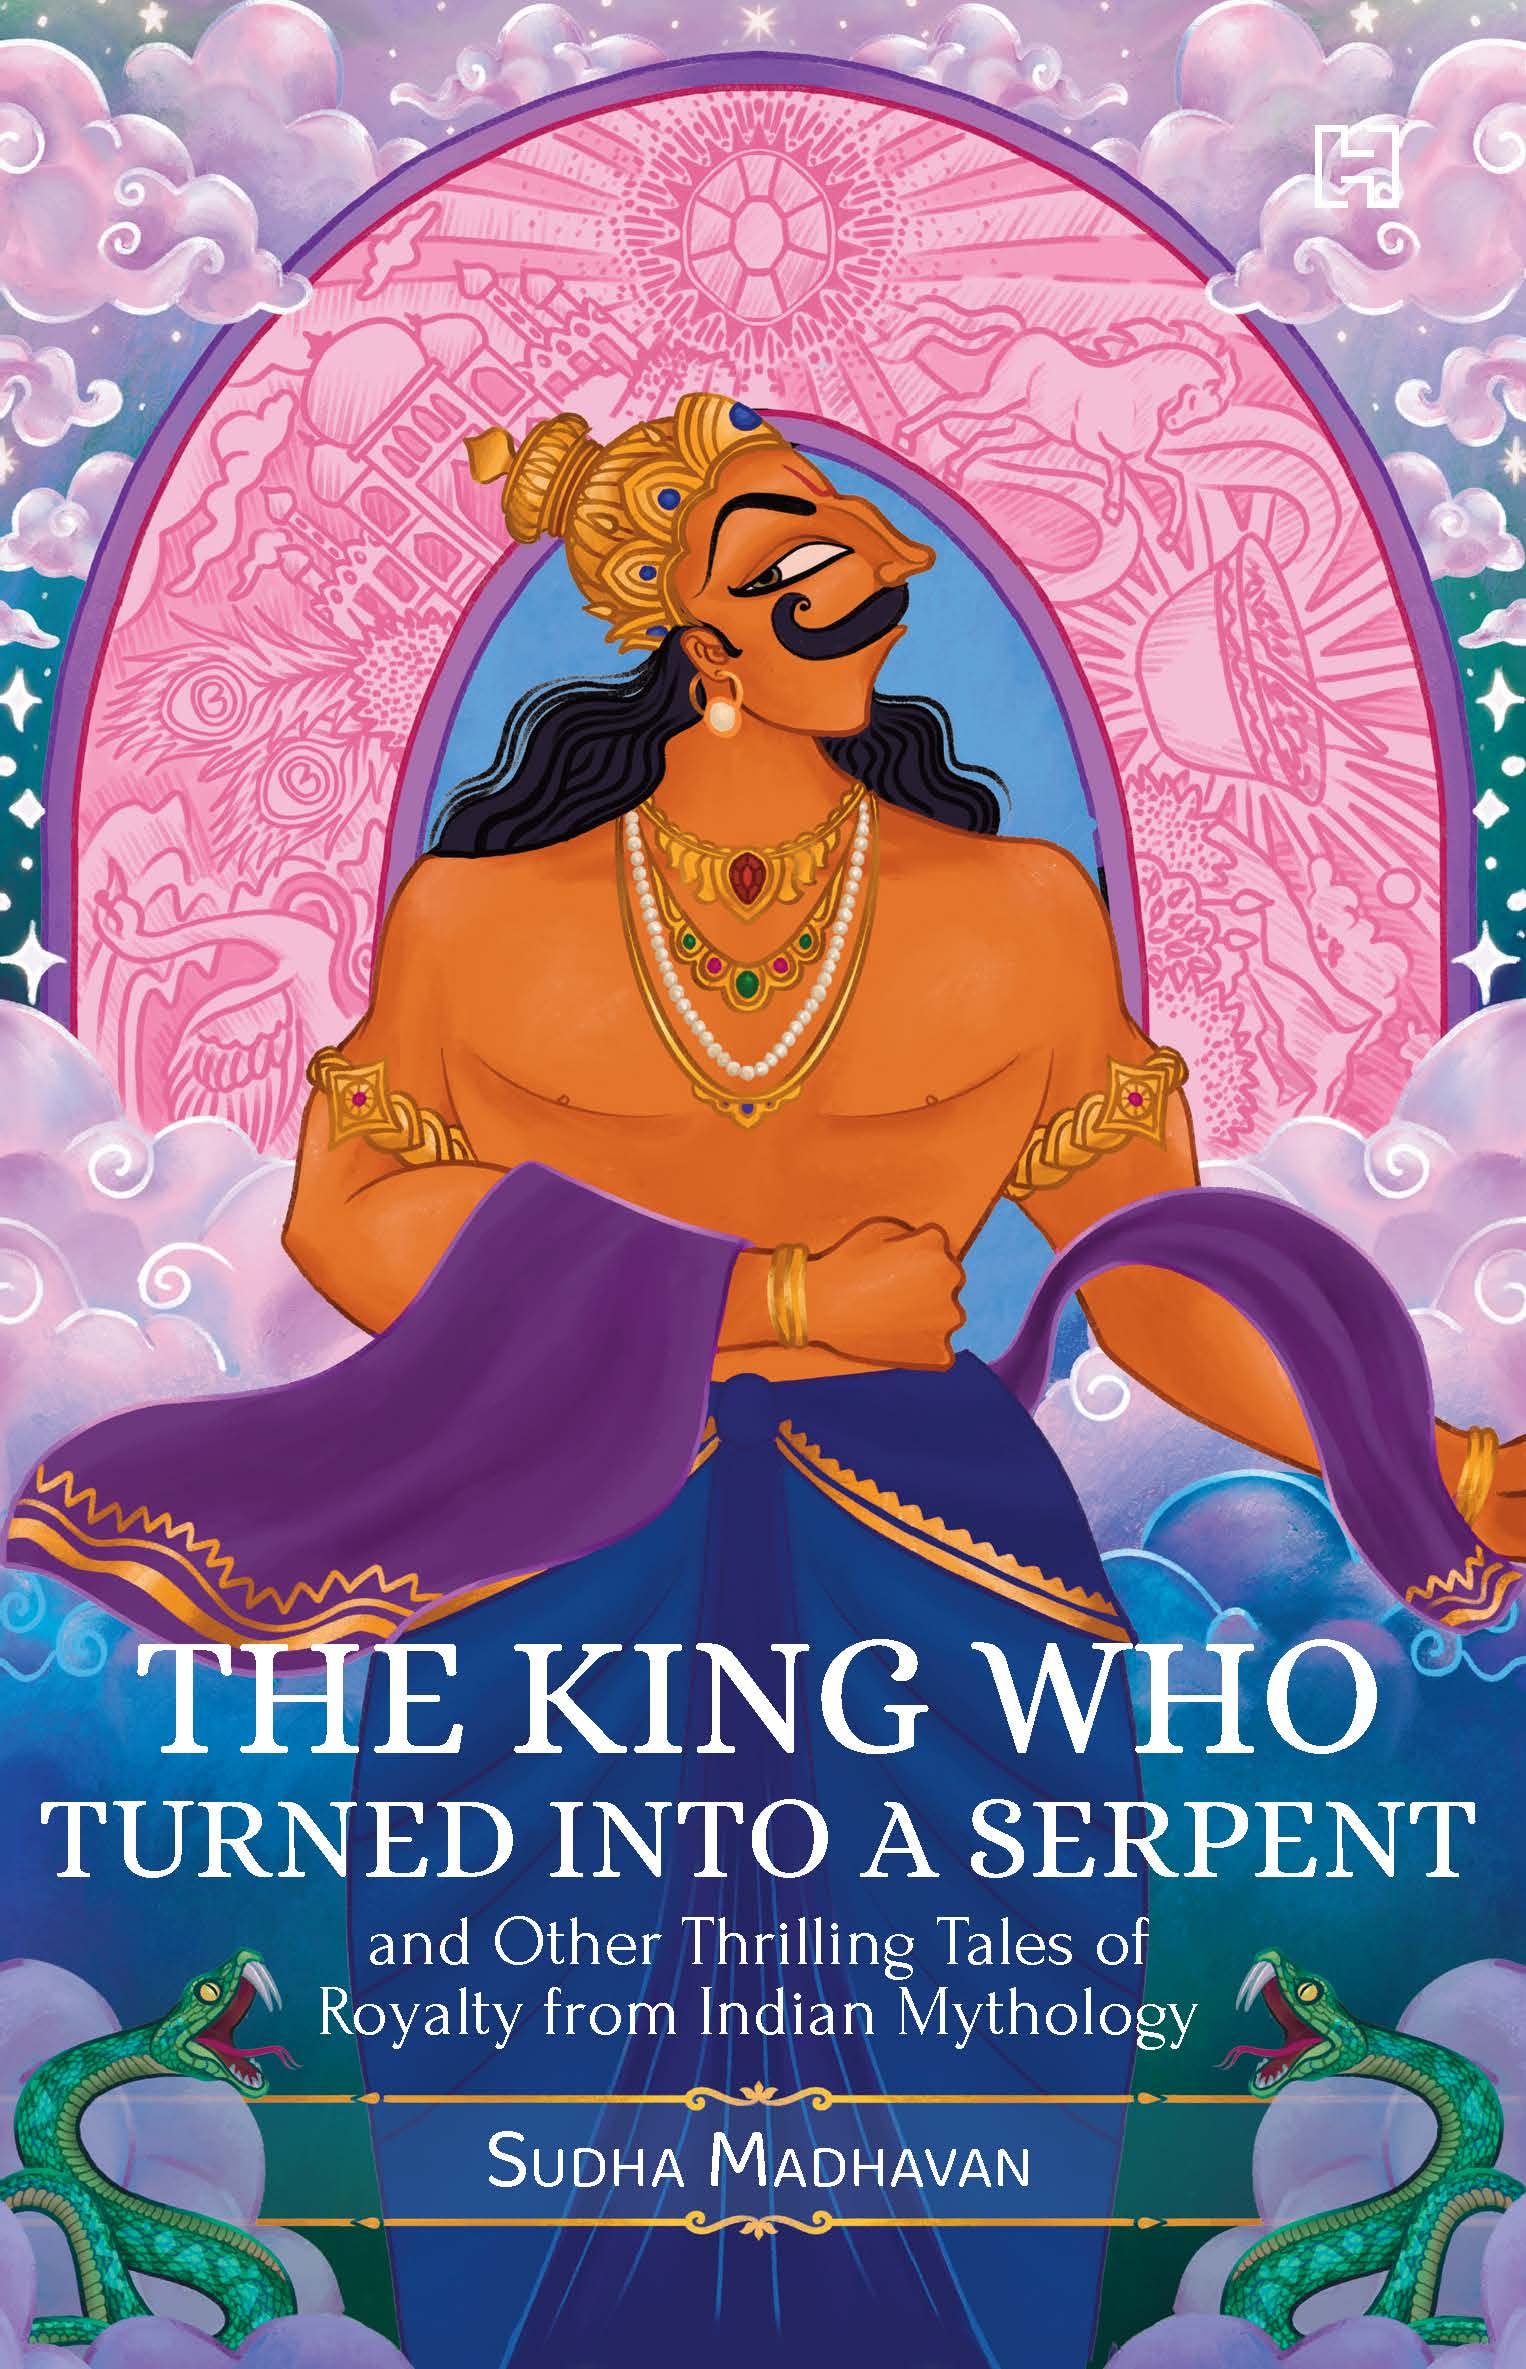 You are currently viewing The King Who Turned into a Serpent and Other Thrilling Tales of Royalty from Indian Mythology by Sudha Madhavan